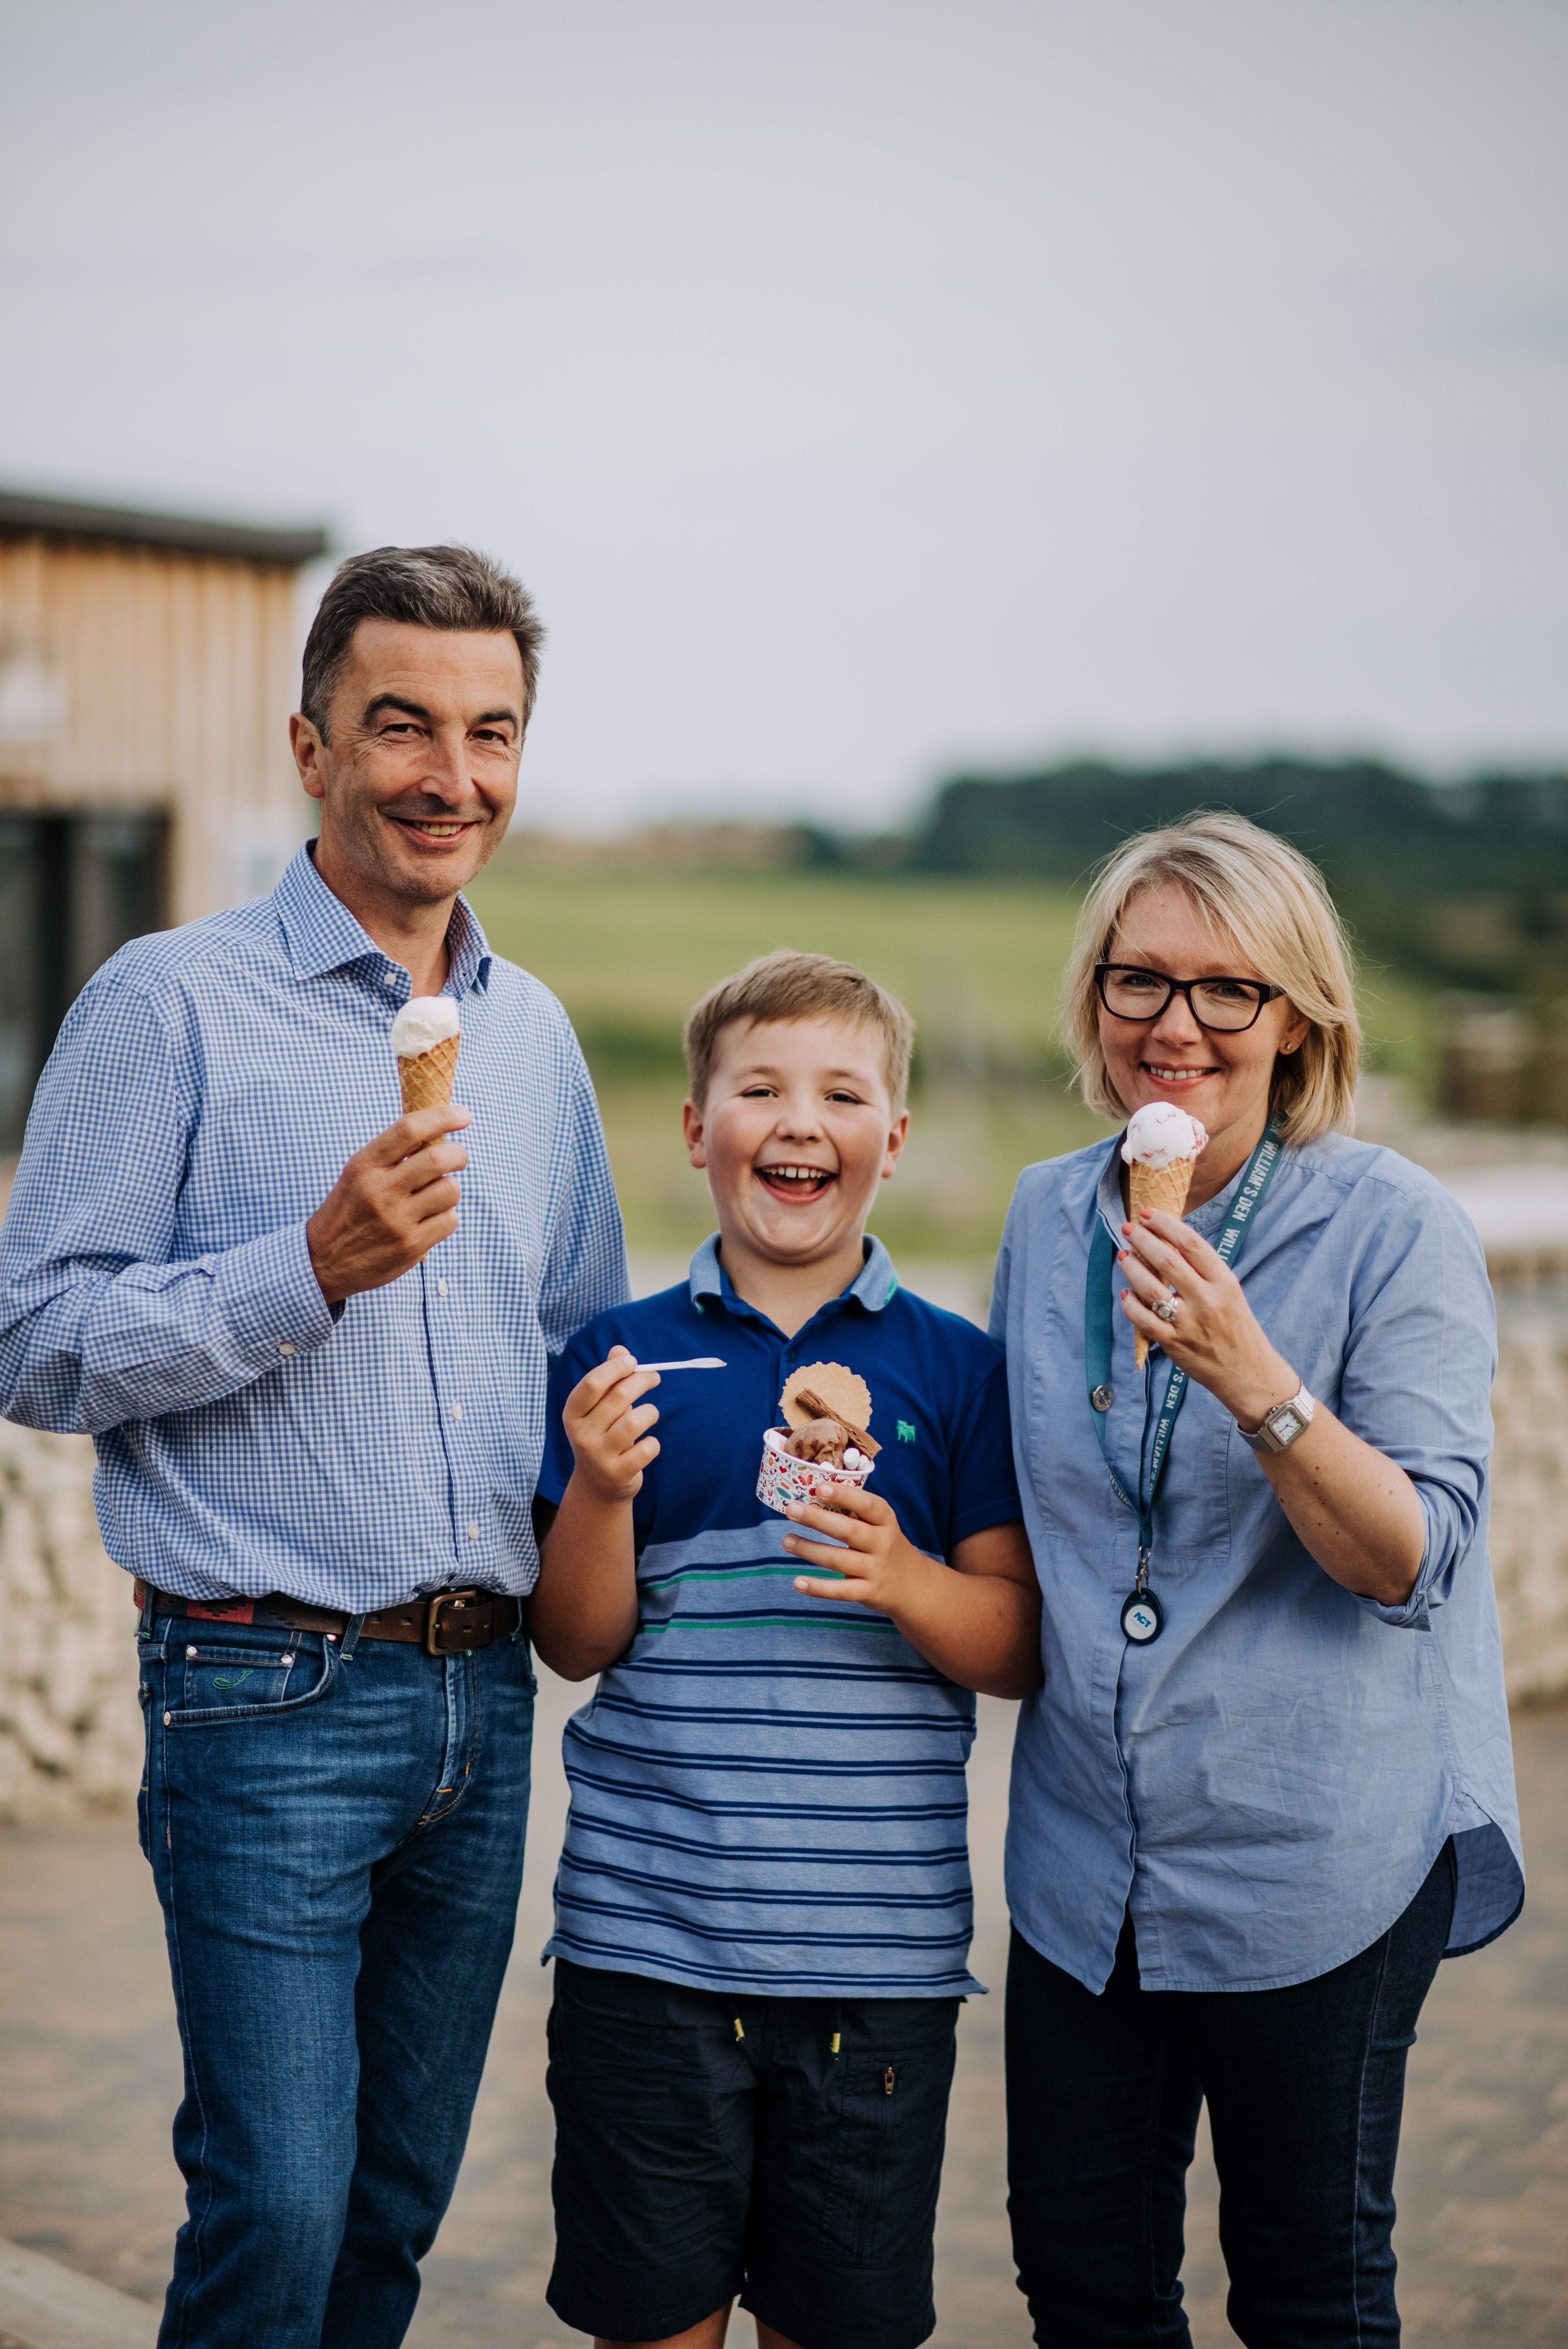 William's Den Ice Cream - Tor and Christian owners of William's Den, with son William